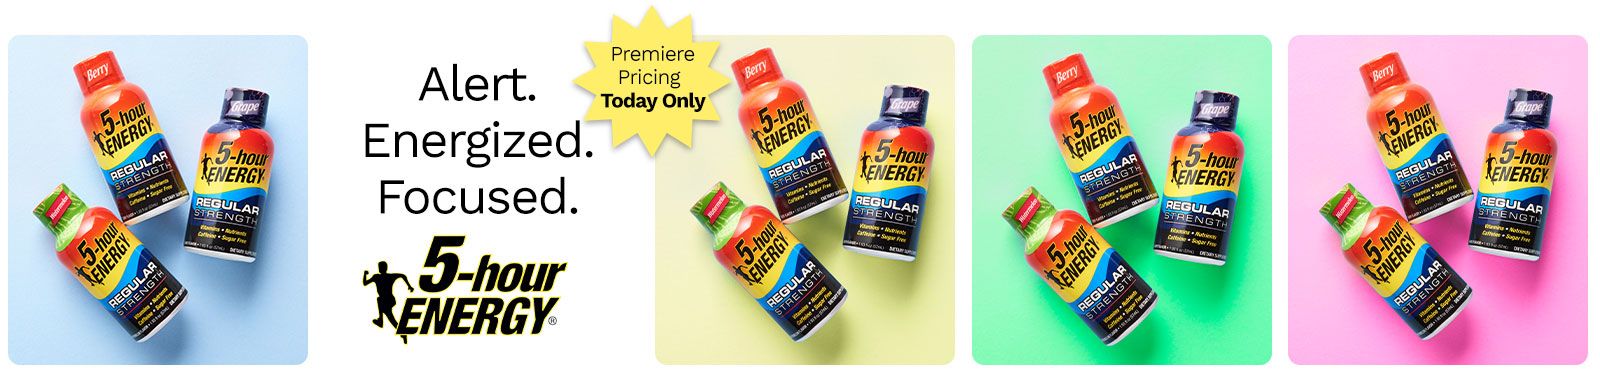 5-Hour Energy: 5-Hour Energy Logo Alert, Energized & Focused Gift | Premiere Pricing Today Only